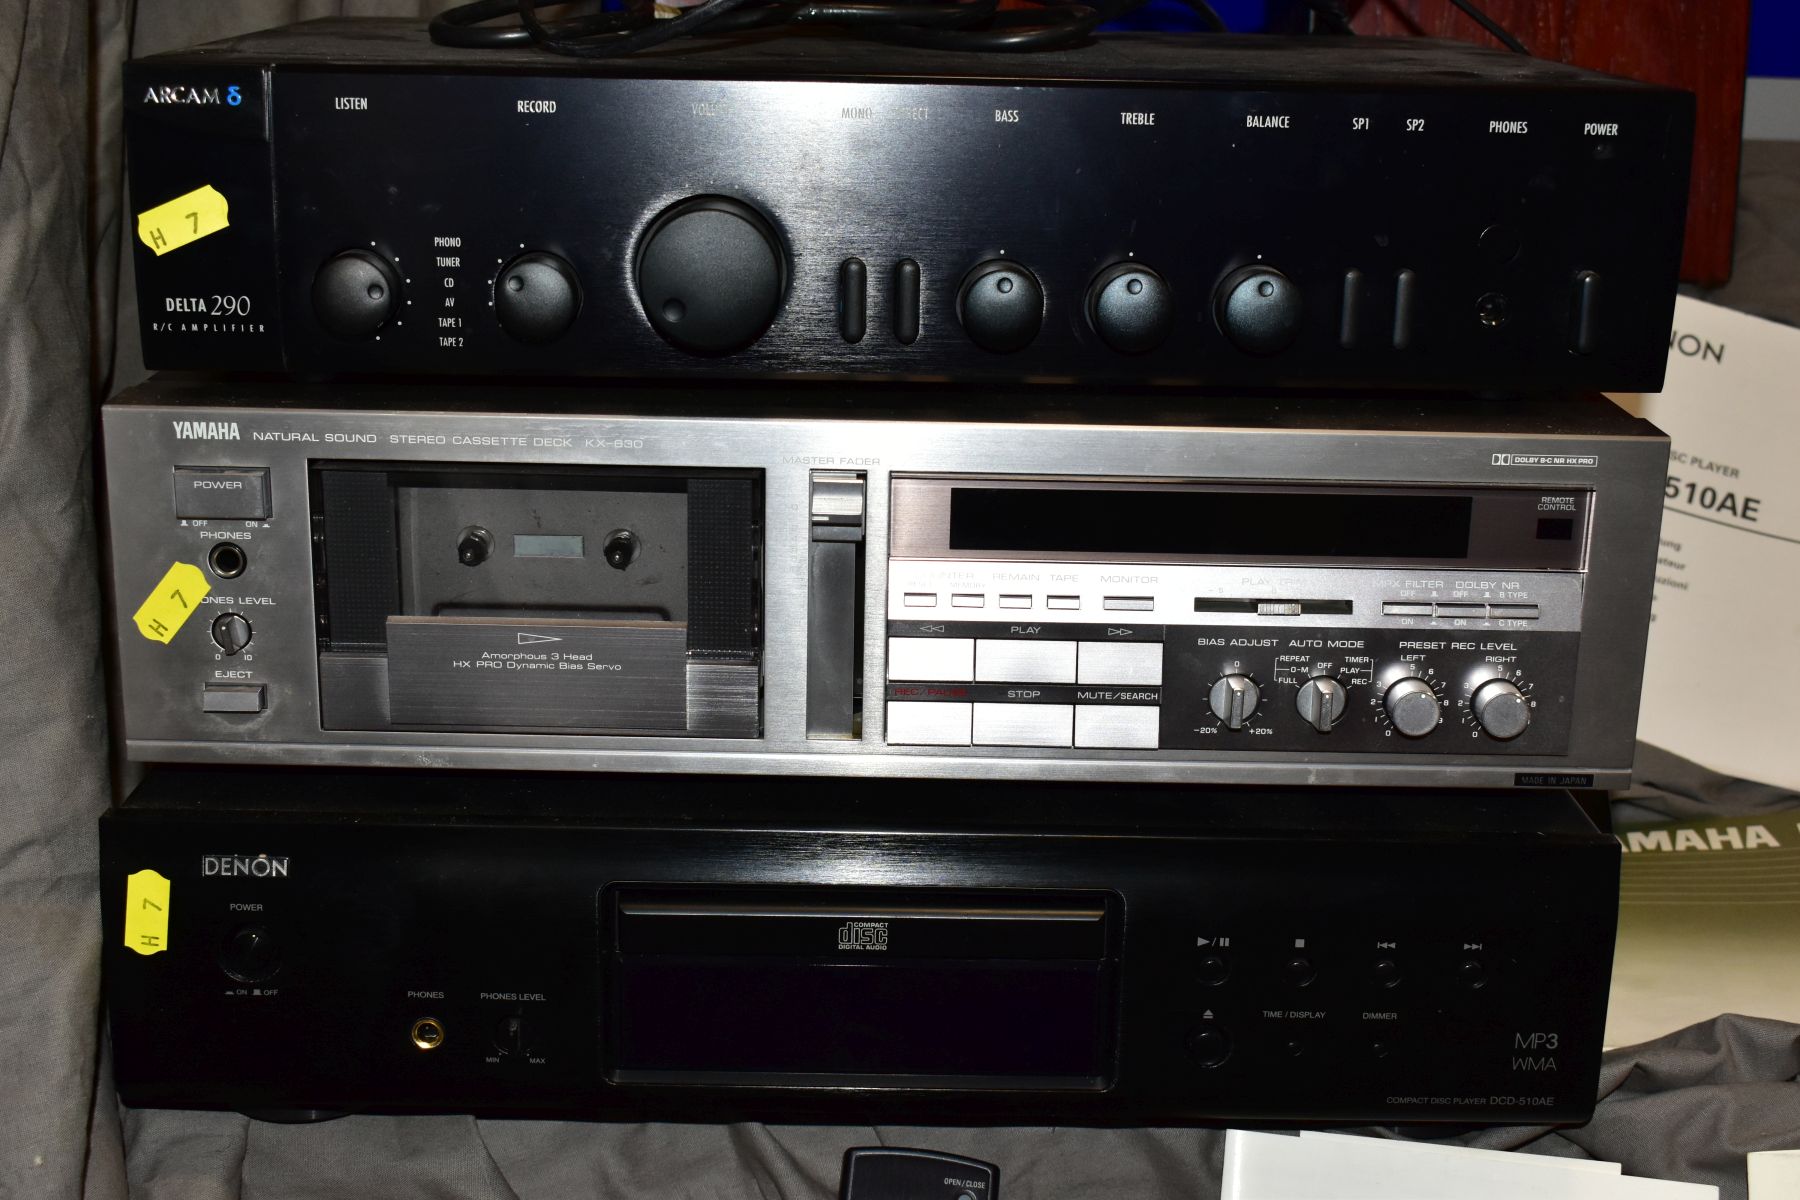 AN ARCAM DELTA 290 INTERGRATED AMPLIFIER, a Yamaha KX-630 Tape Player, a Denon DCD 510AE CD player - Image 2 of 17